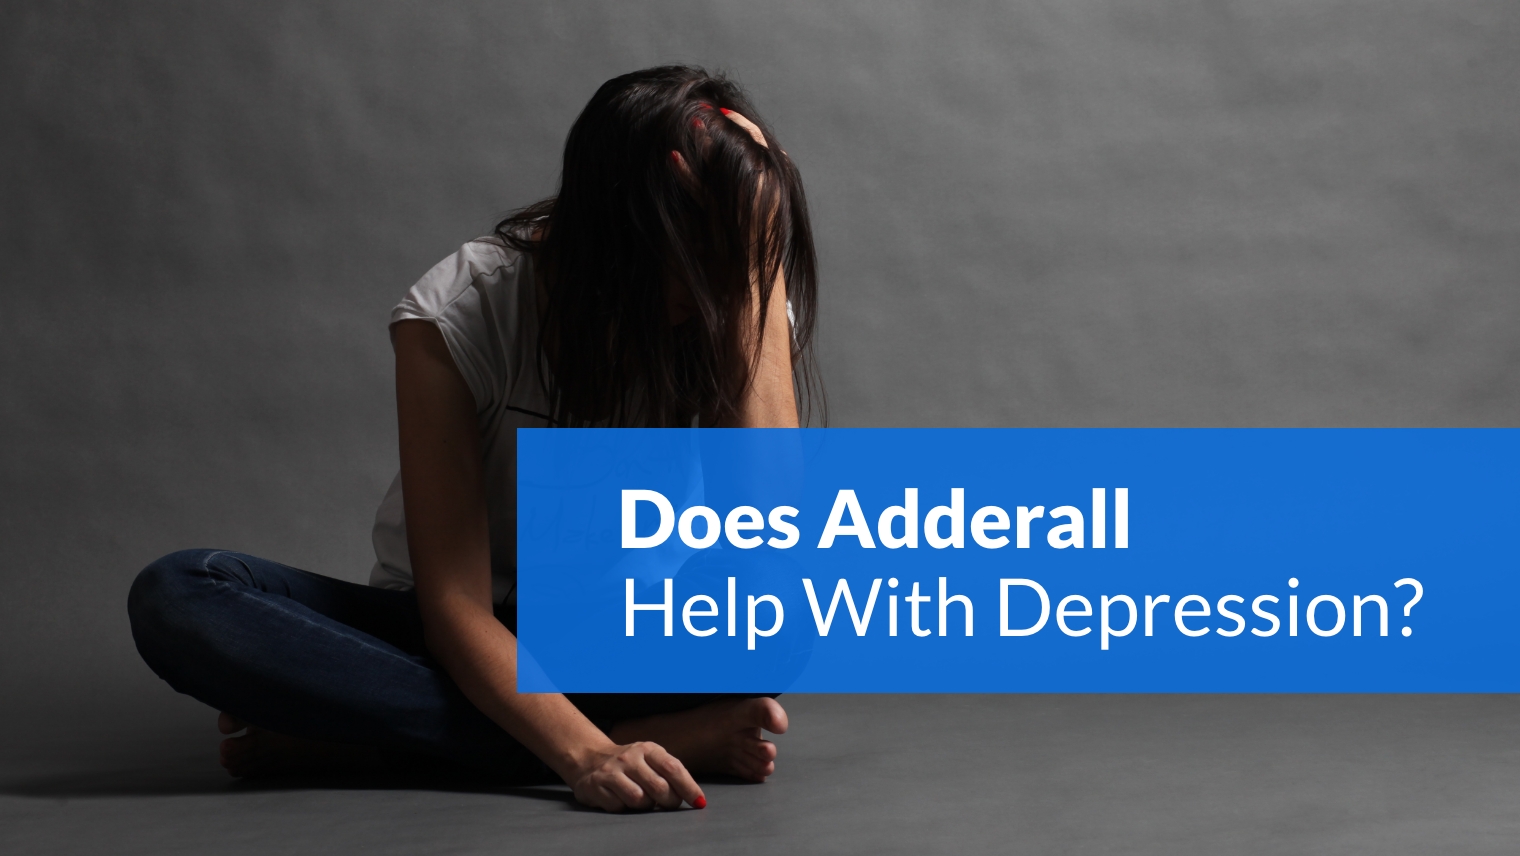 Does Adderall Help With Depression?